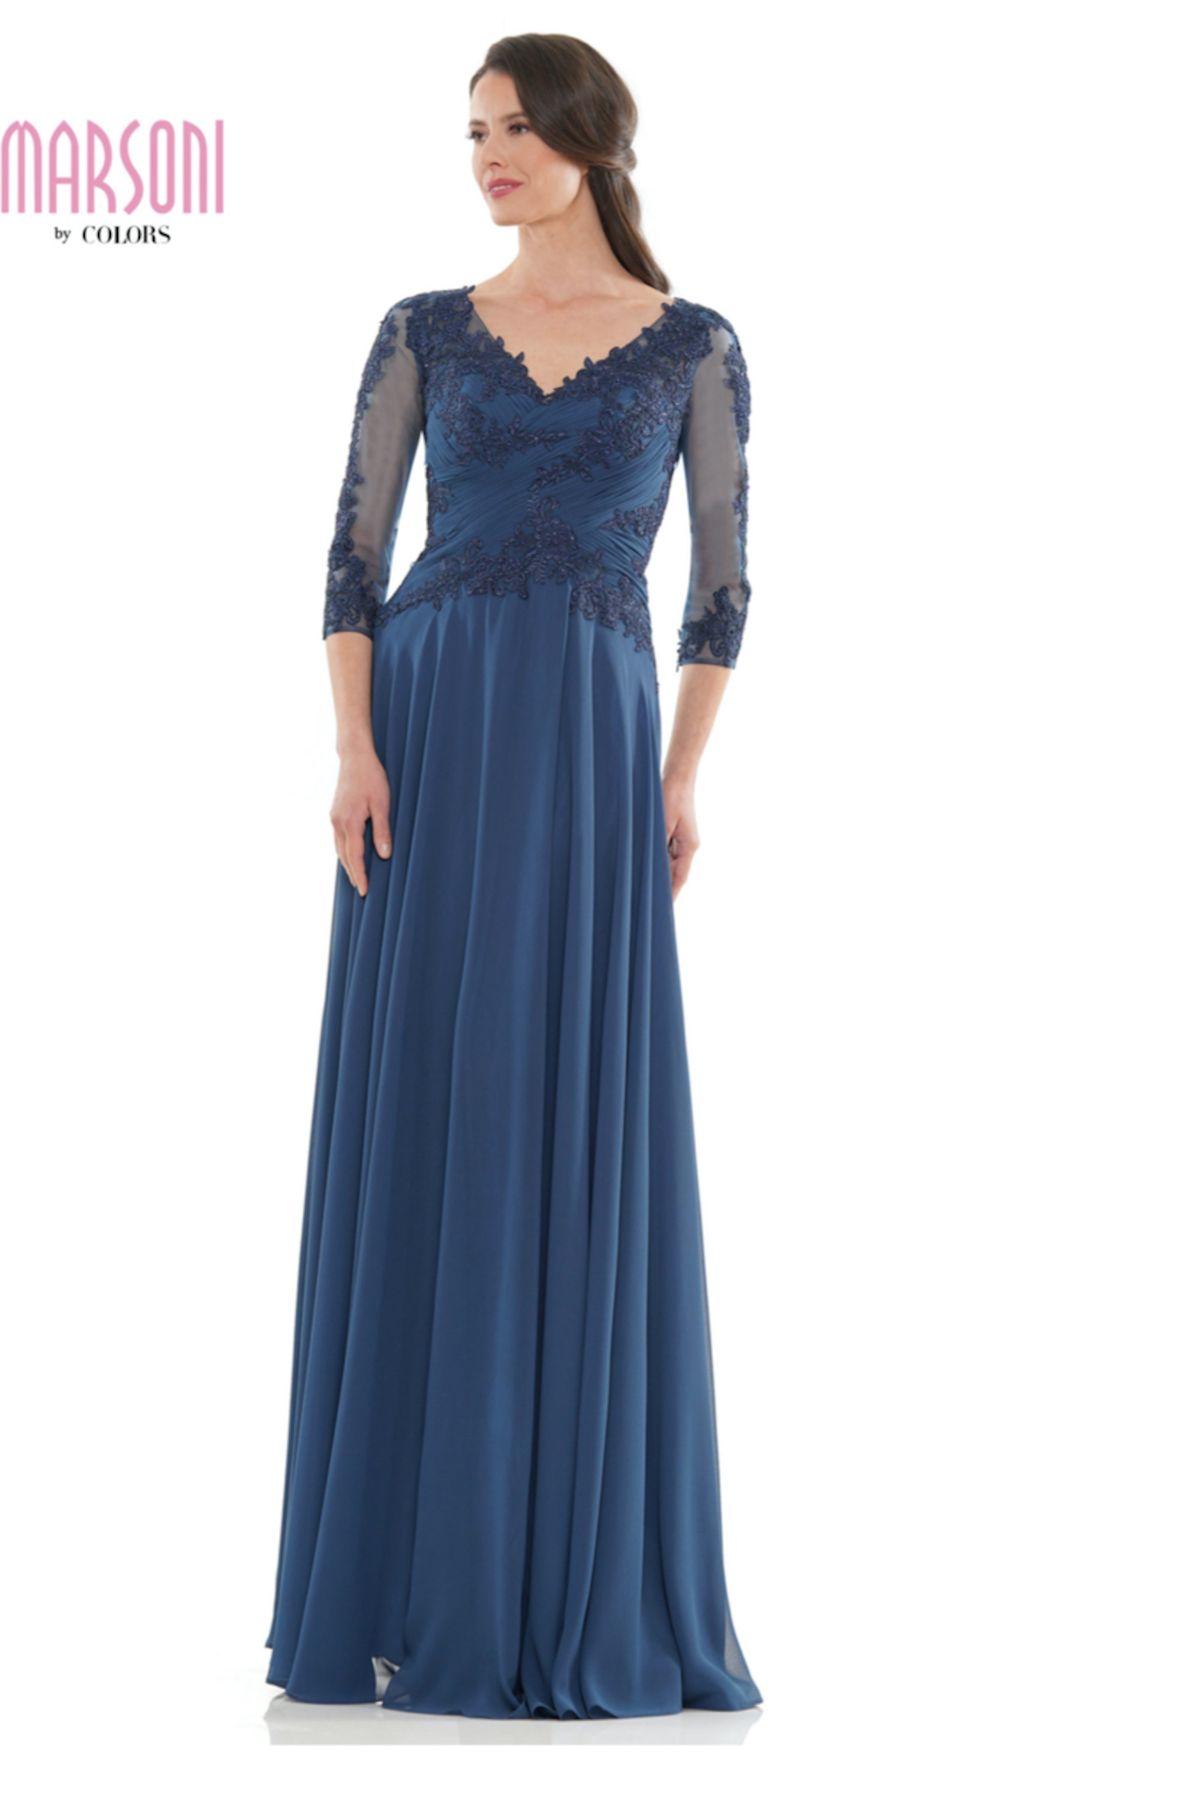 Style M237 Marsoni by Colors Dress Size 6 Bridesmaid Long Sleeve Lace Navy Blue Floor Length Maxi on Queenly